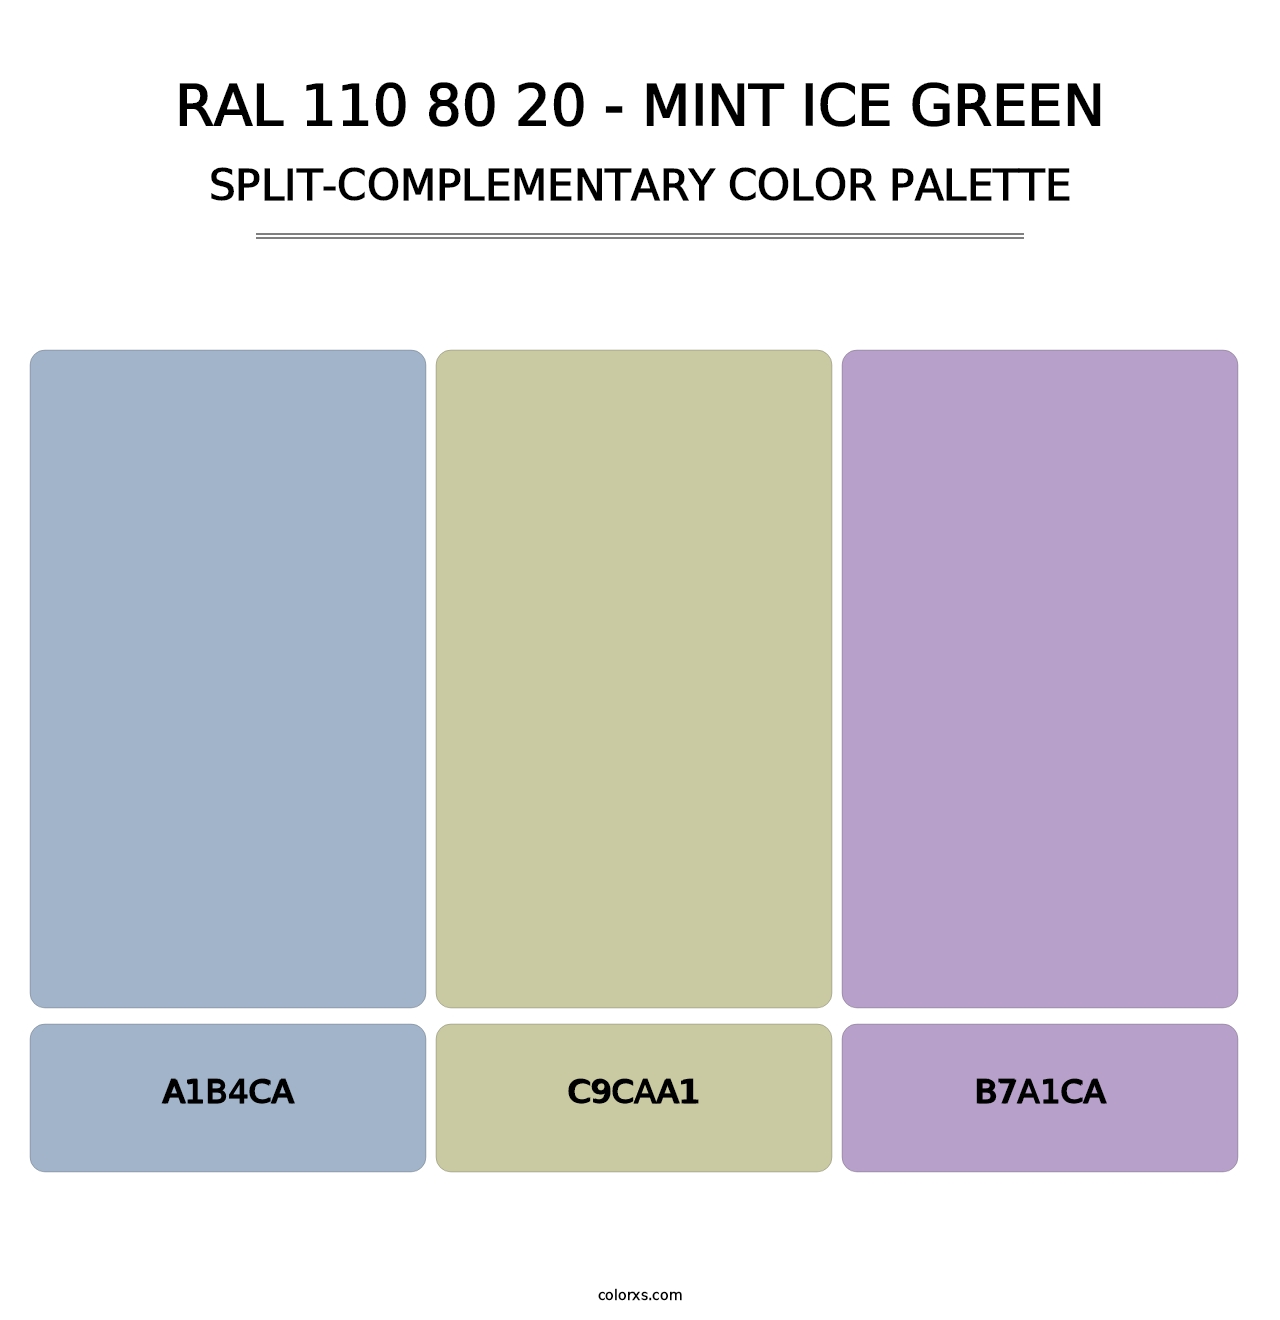 RAL 110 80 20 - Mint Ice Green - Split-Complementary Color Palette